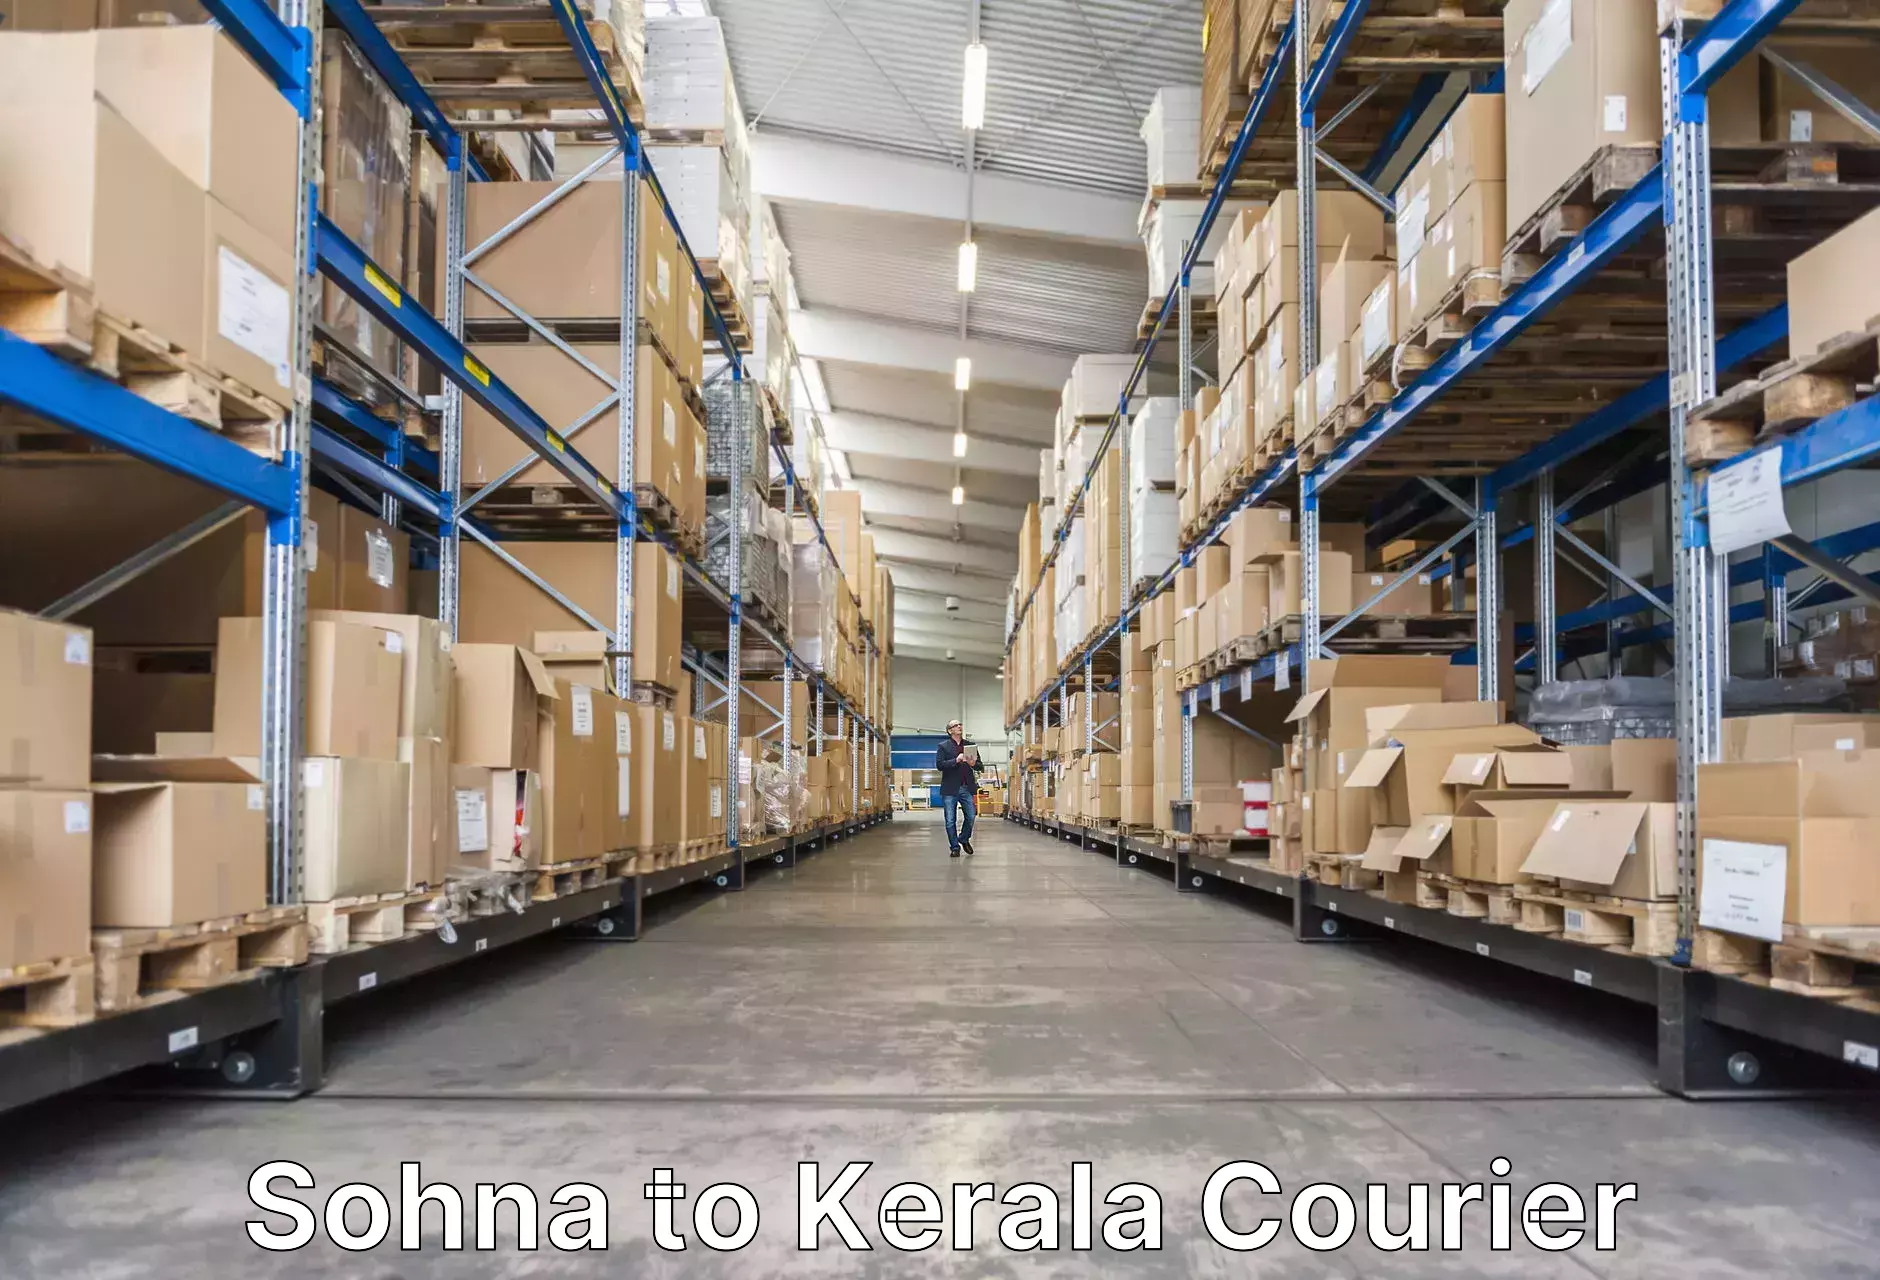 Luggage shipment specialists Sohna to Cochin University of Science and Technology